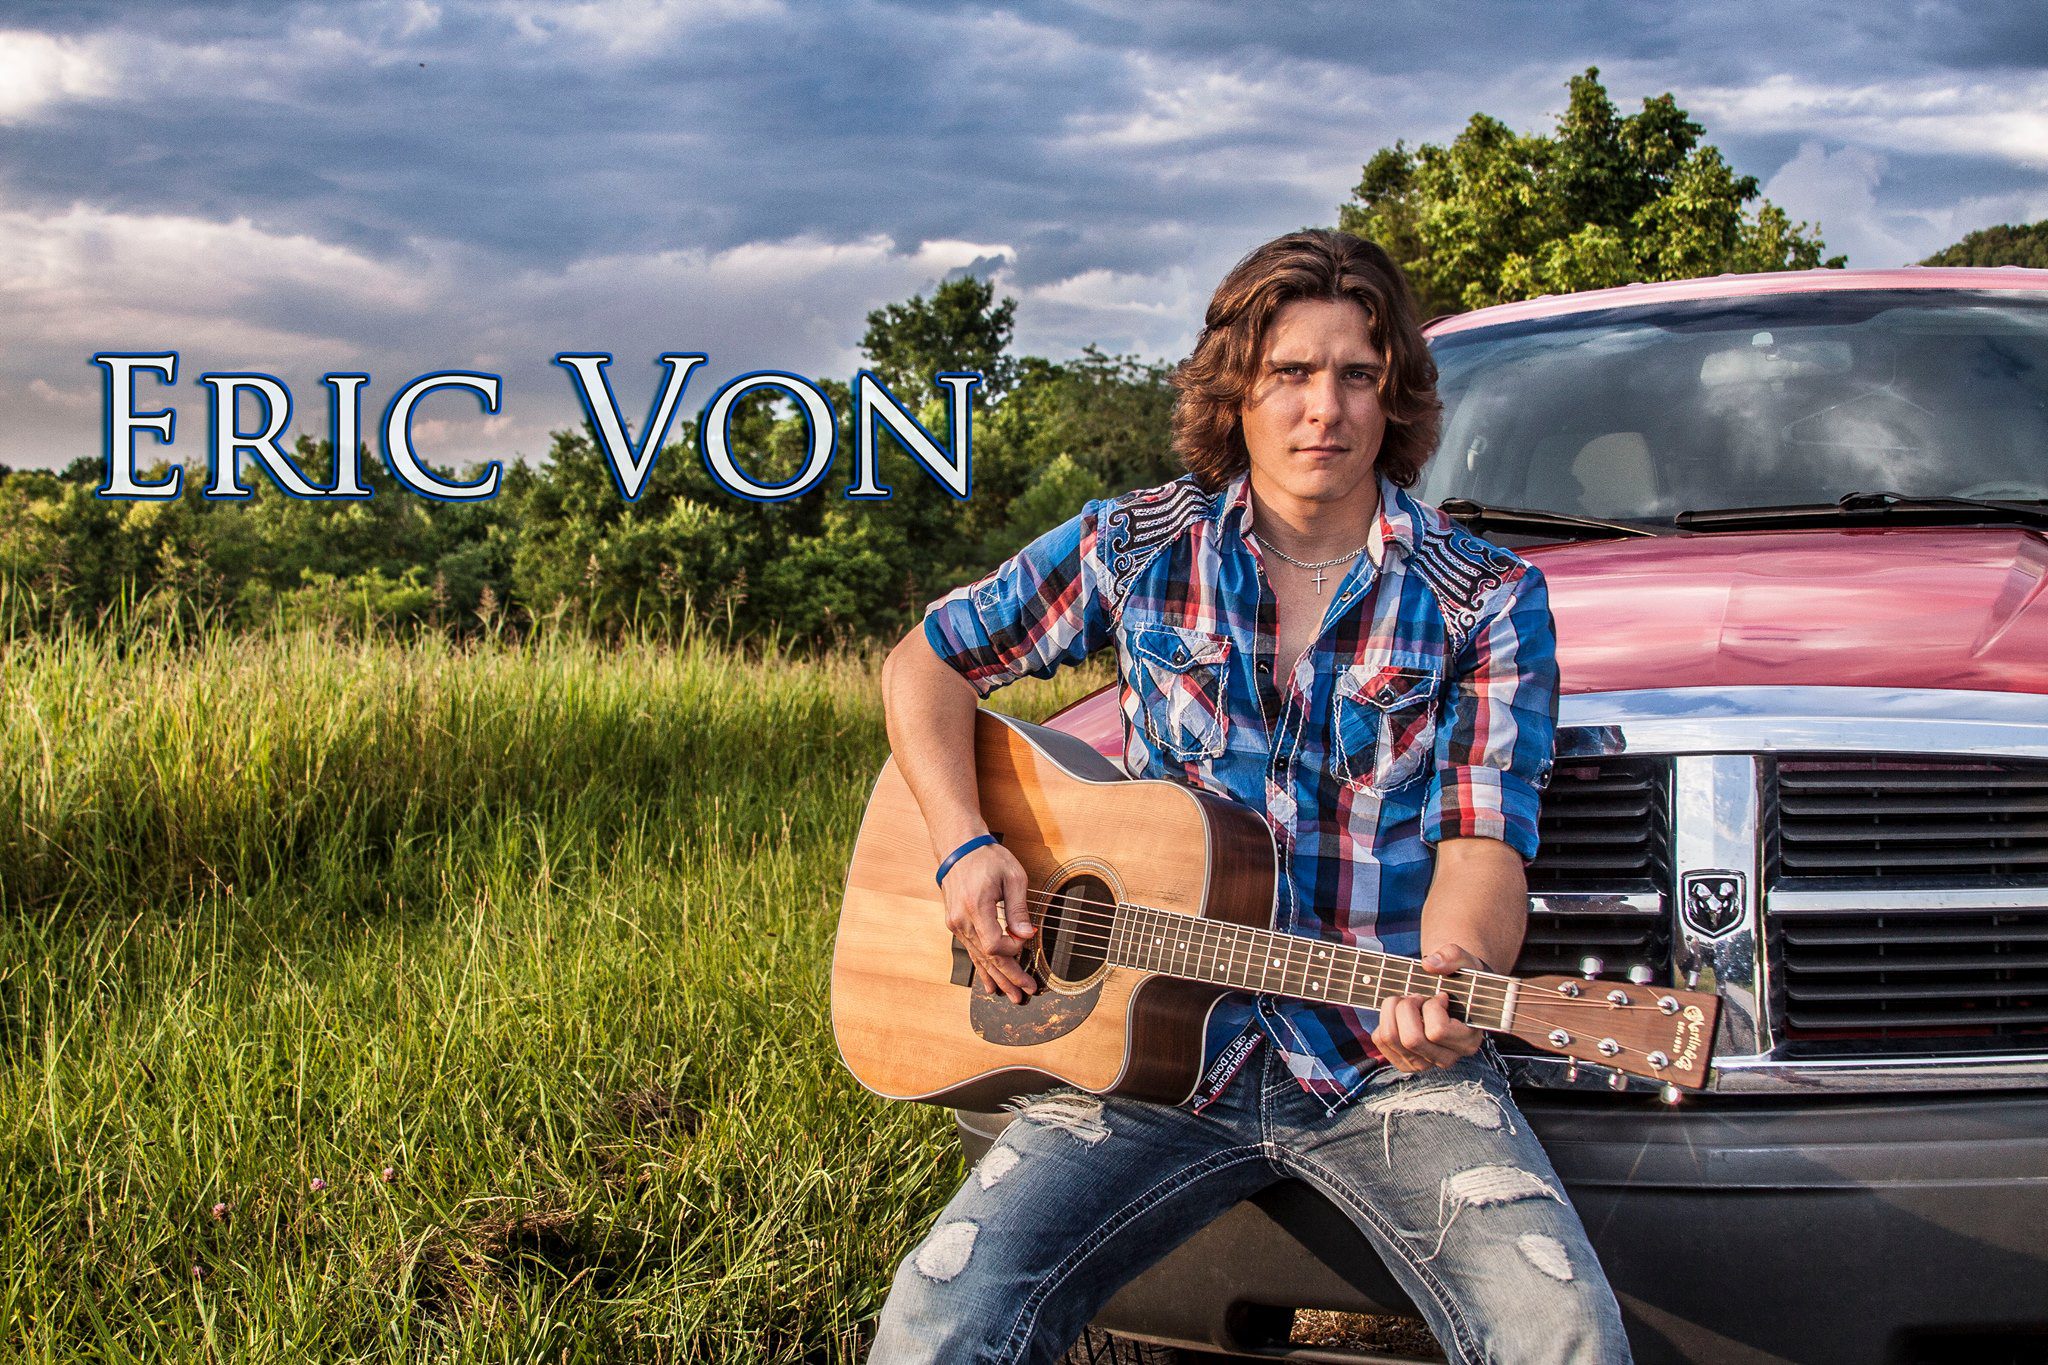 Motorworks Brewing presents Eric Von performer with guitar in the country sitting on a truck bumper